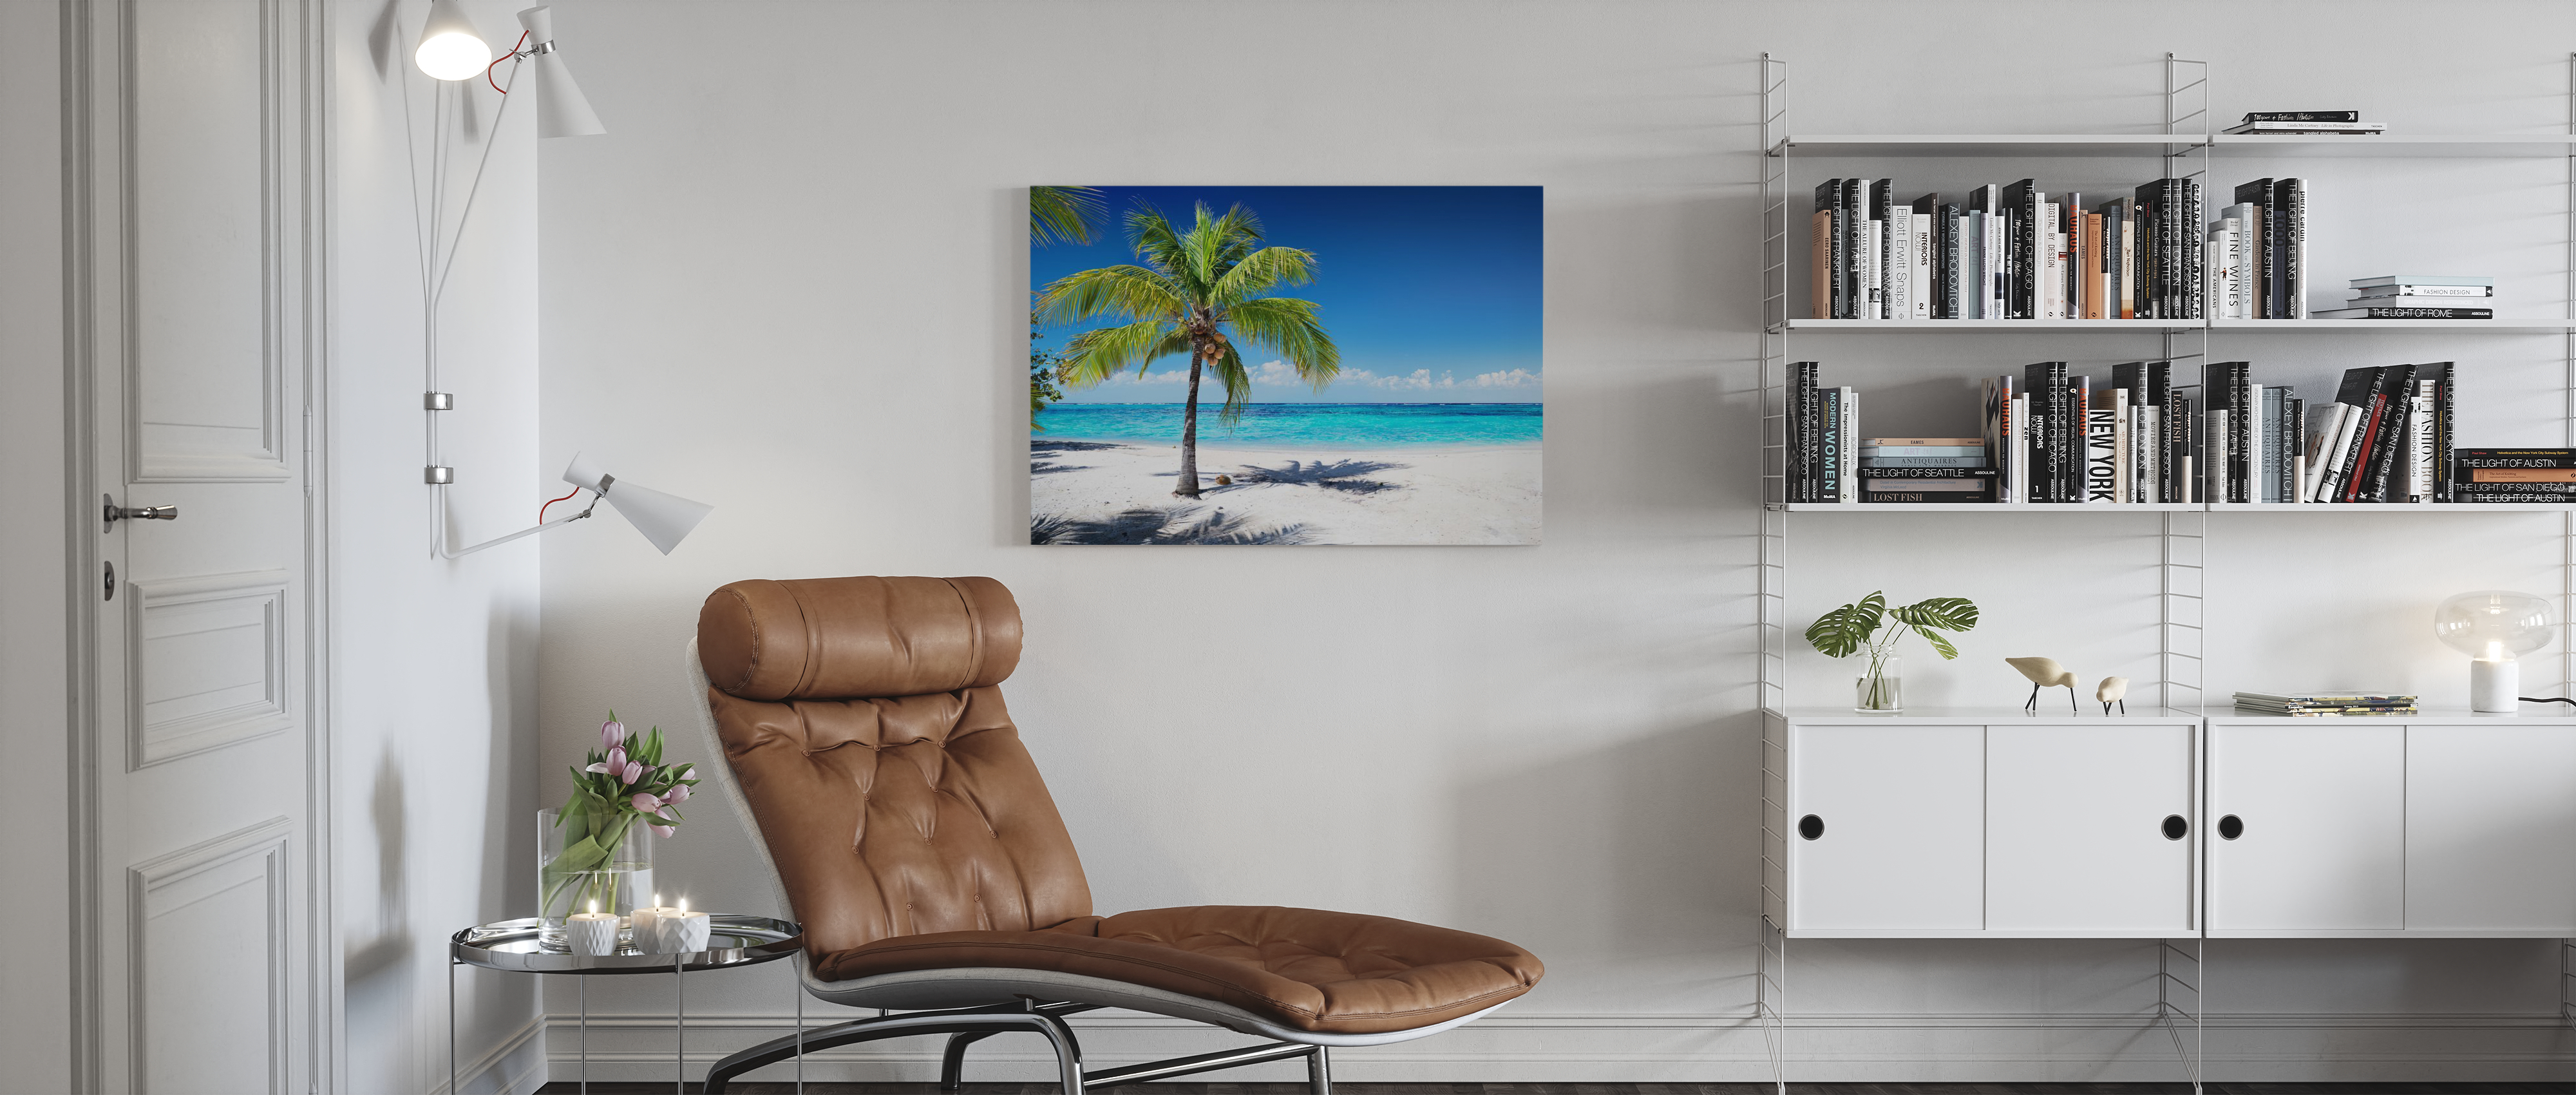 Coral Beach Lounge Chairs Palapa Tropical Palm Tree Photo Poster 18x12 inch 